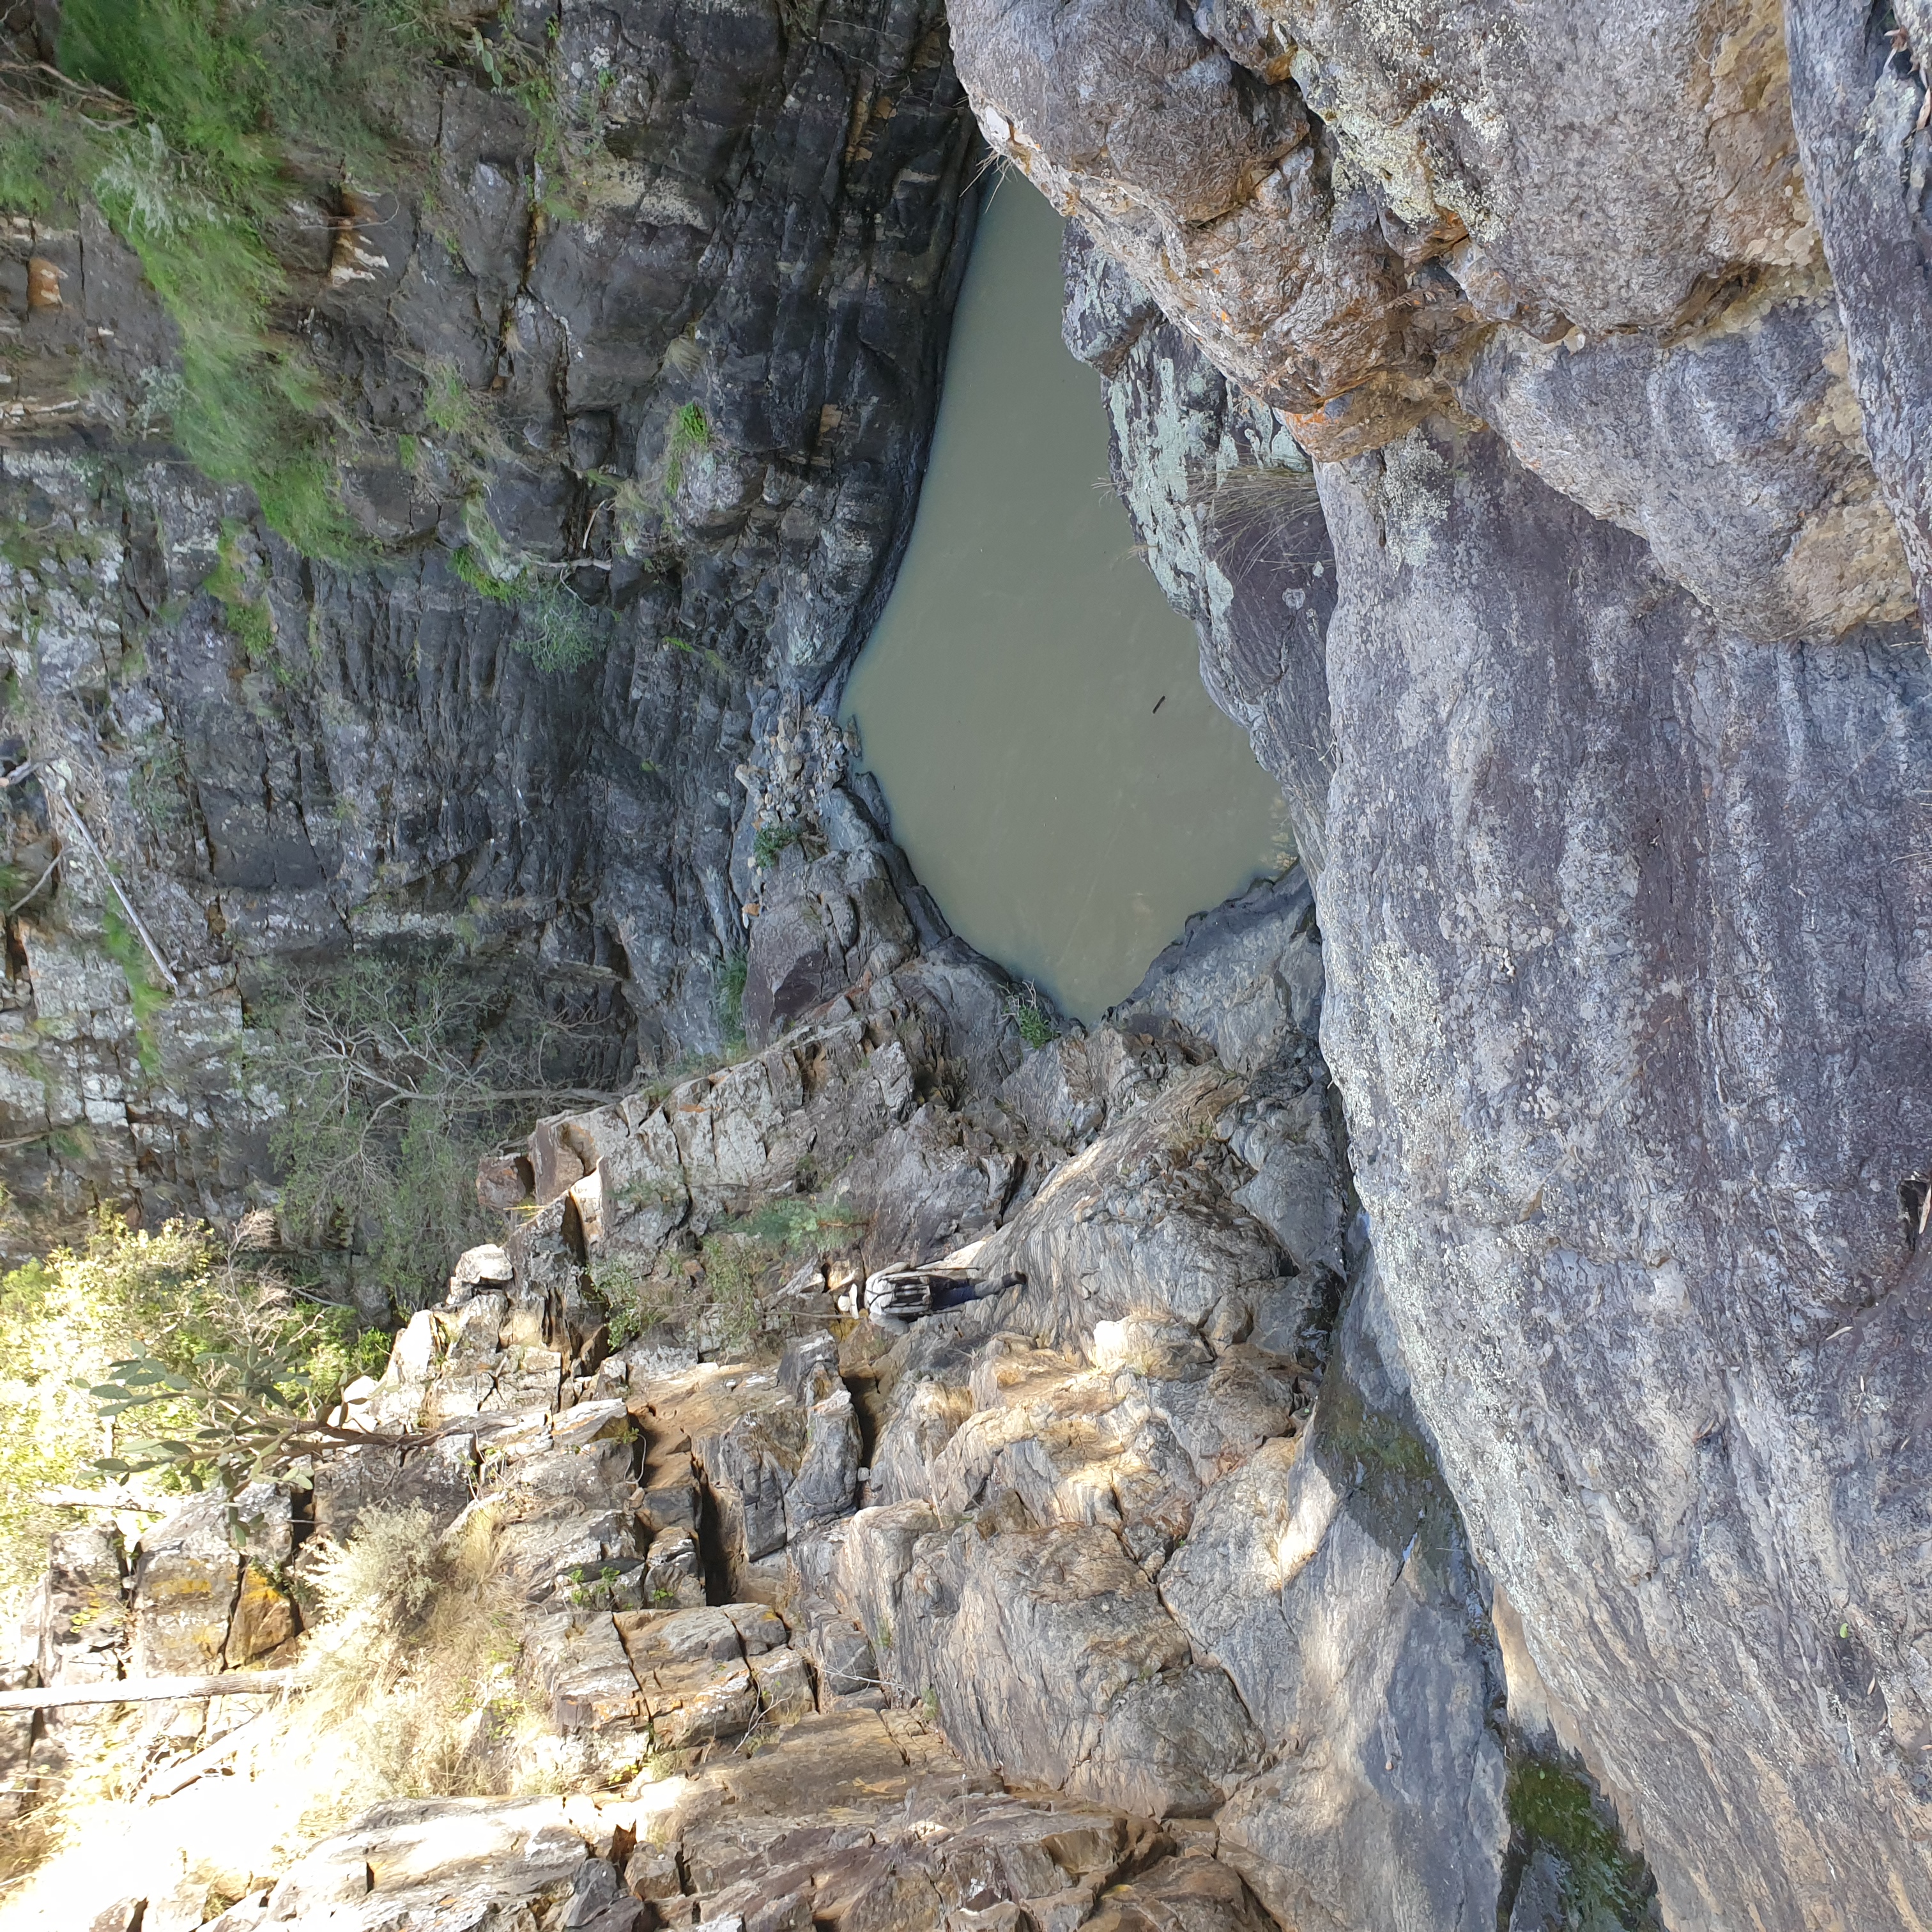 Ian descends into the gorge section of Ooline Creek